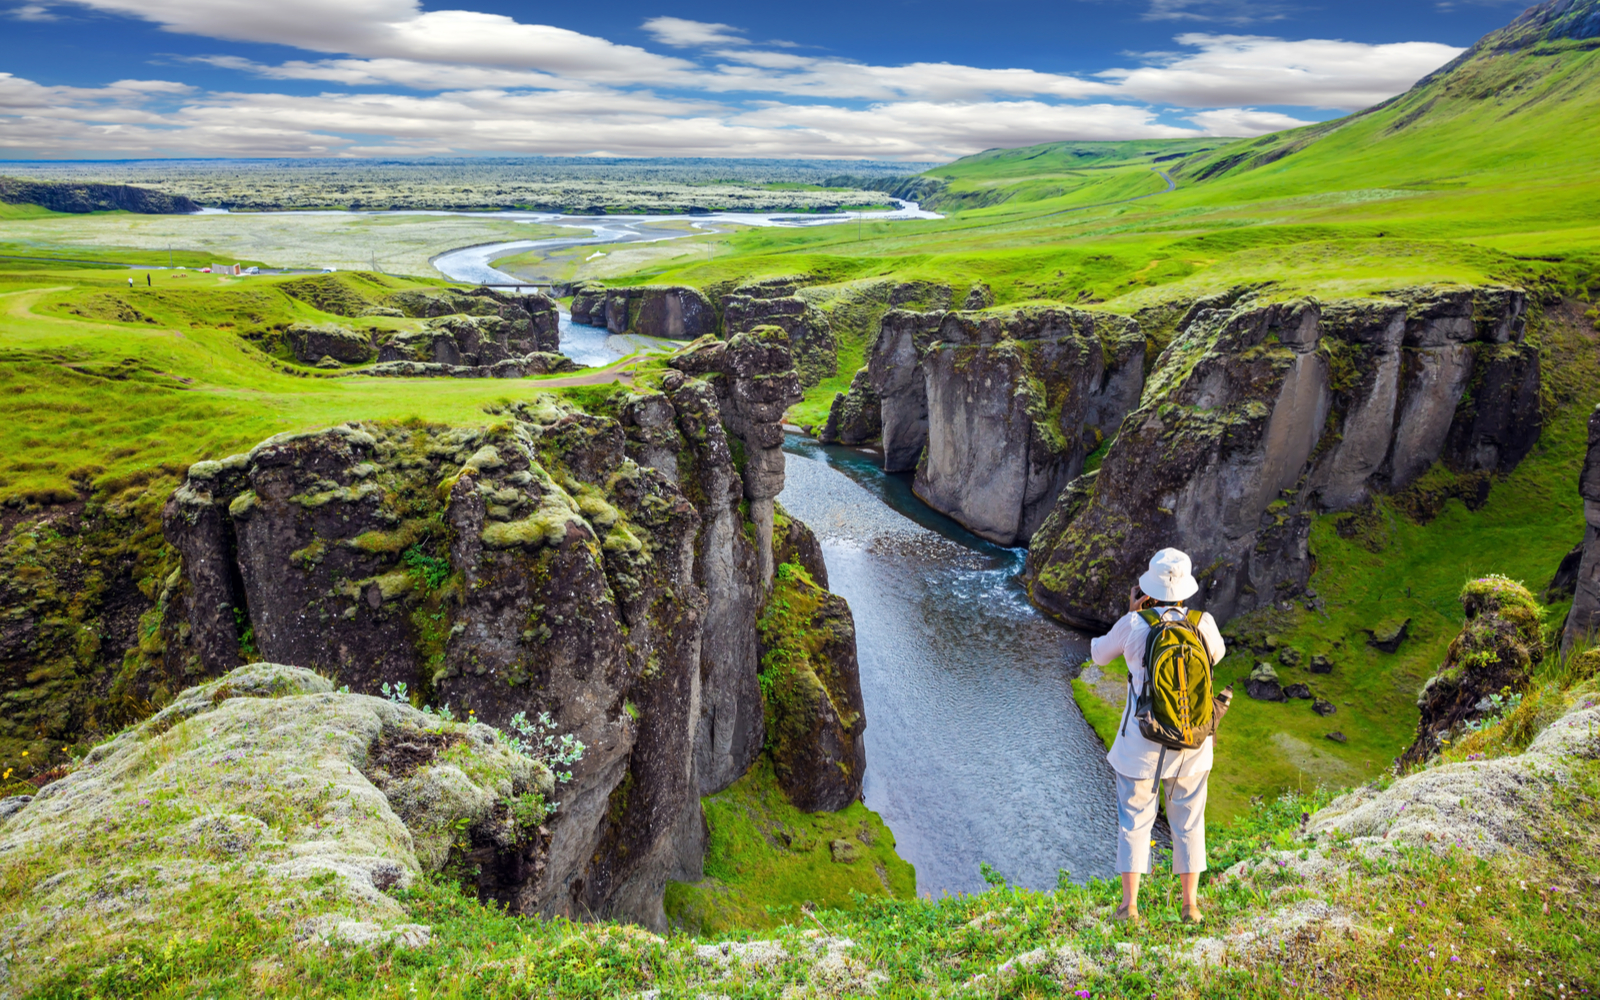 Gorgeous view of one of the best hikes in Iceland, the Fyadrarglyufur canyon